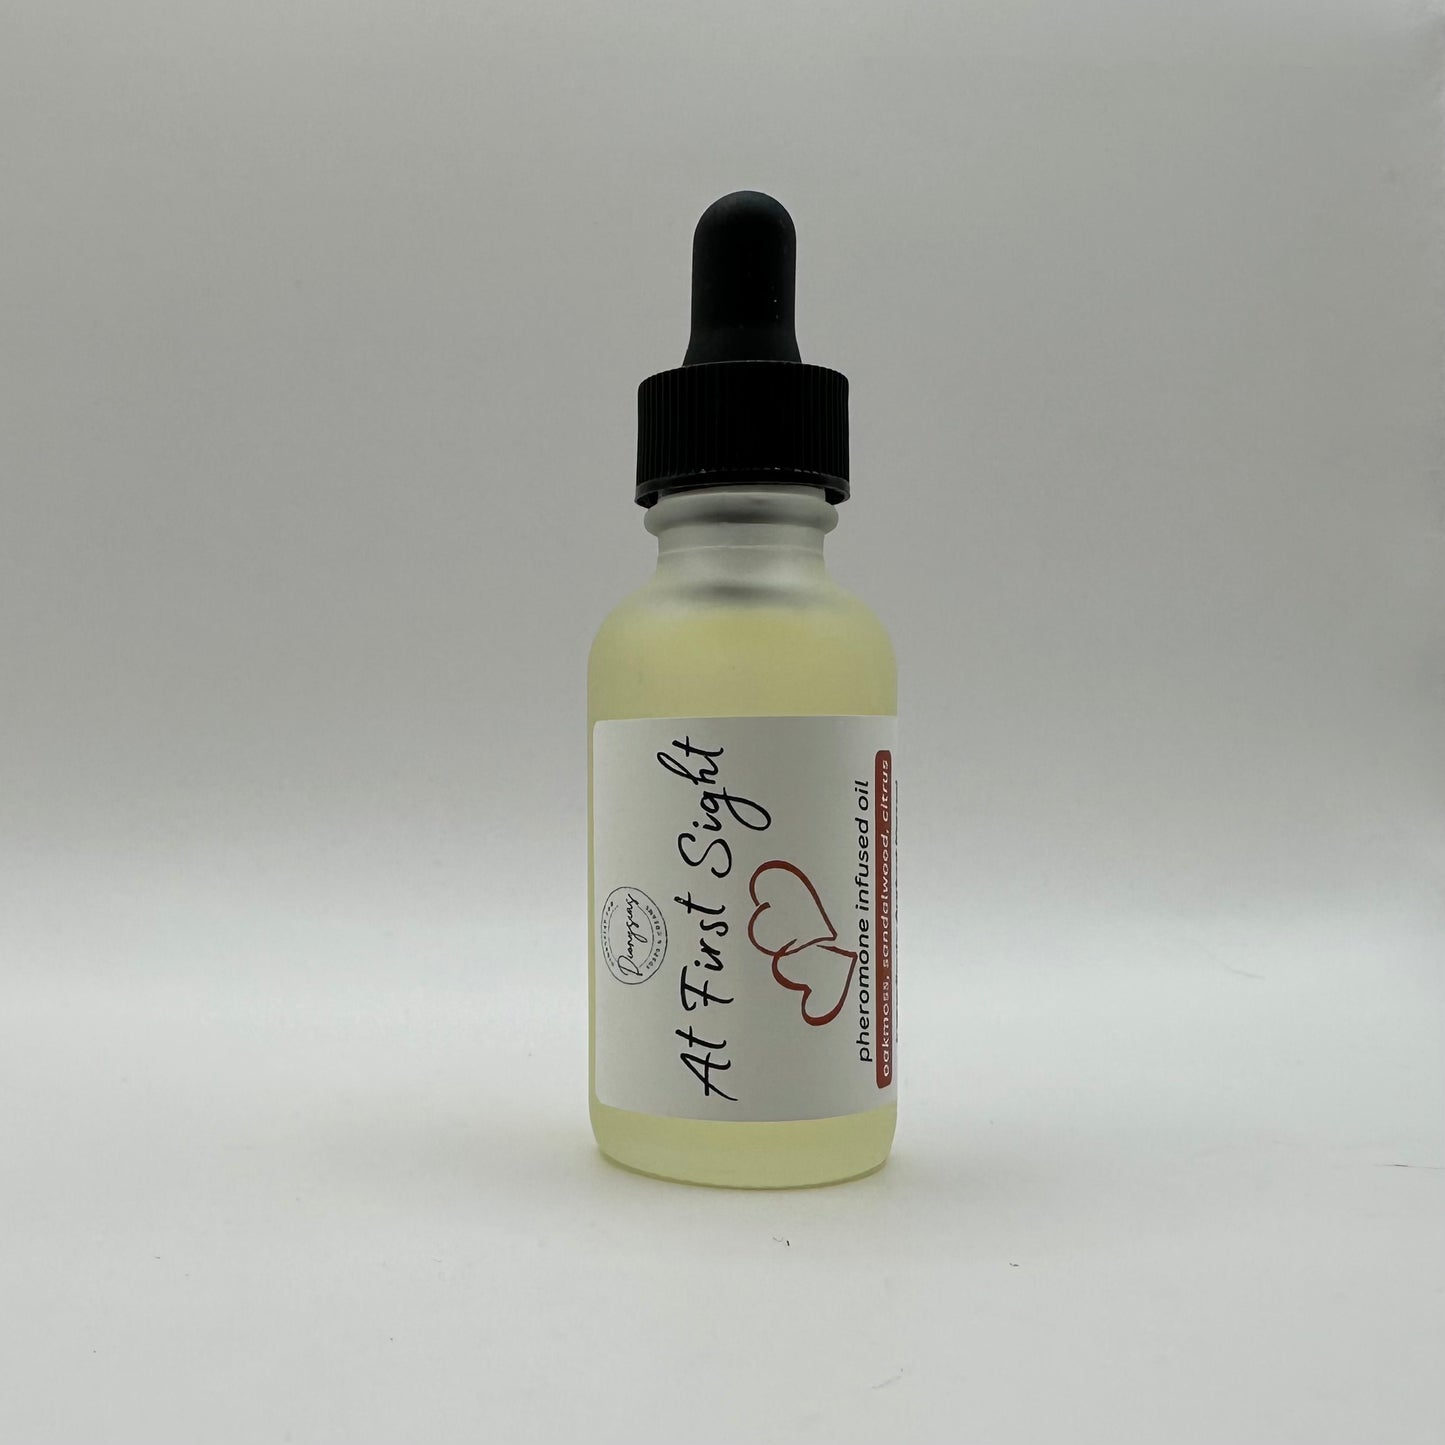 At First Sight (pheromone oil)